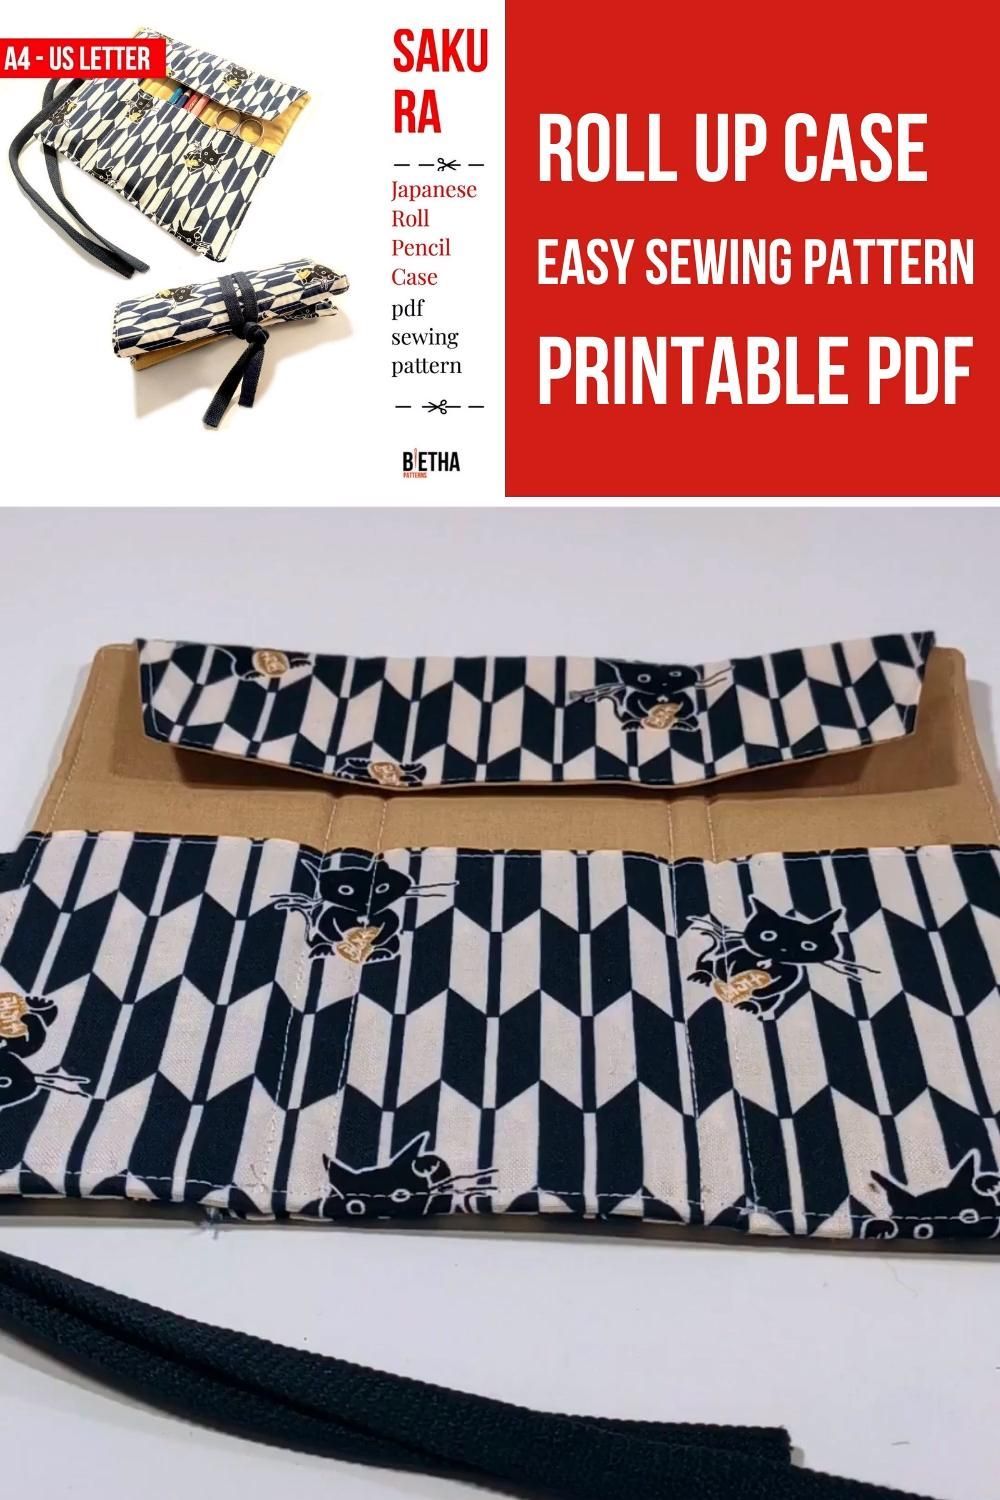 Roll Up Case Easy Sewing Pattern - Printable PDF - Roll Up Case Easy Sewing Pattern - Printable PDF -   19 fabric crafts diy easy ideas